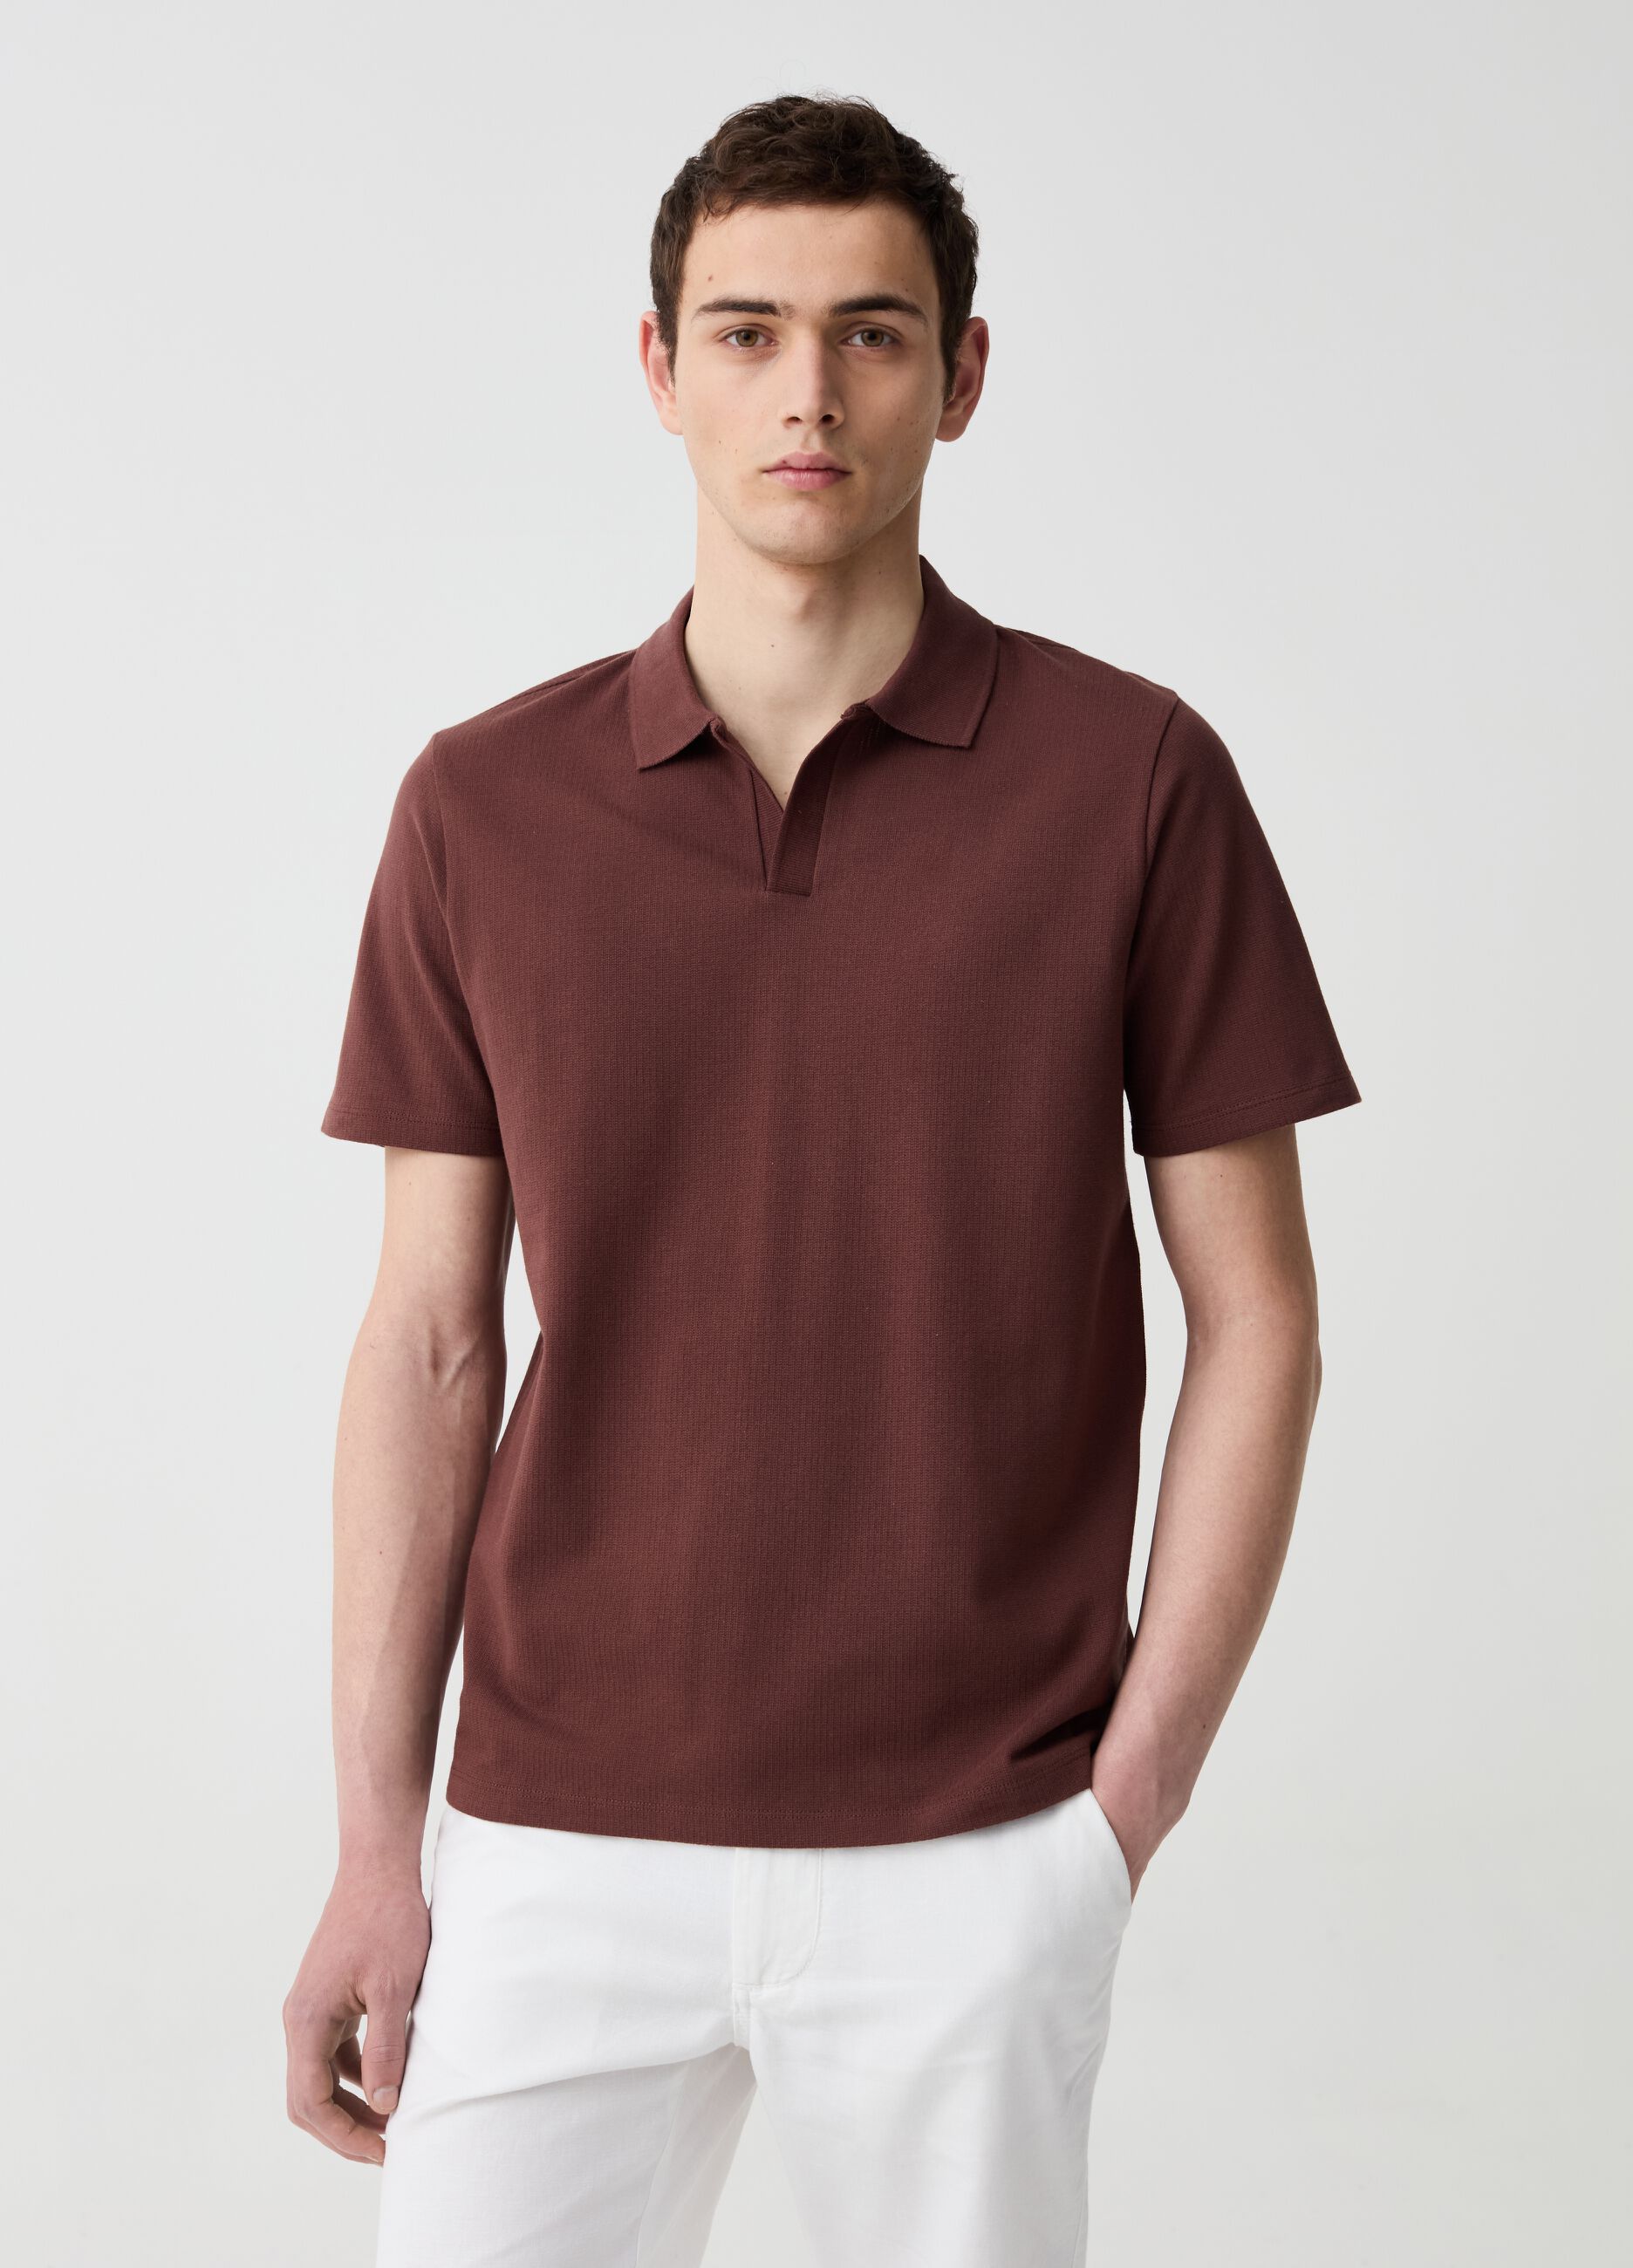 Organic cotton polo shirt with textured weave